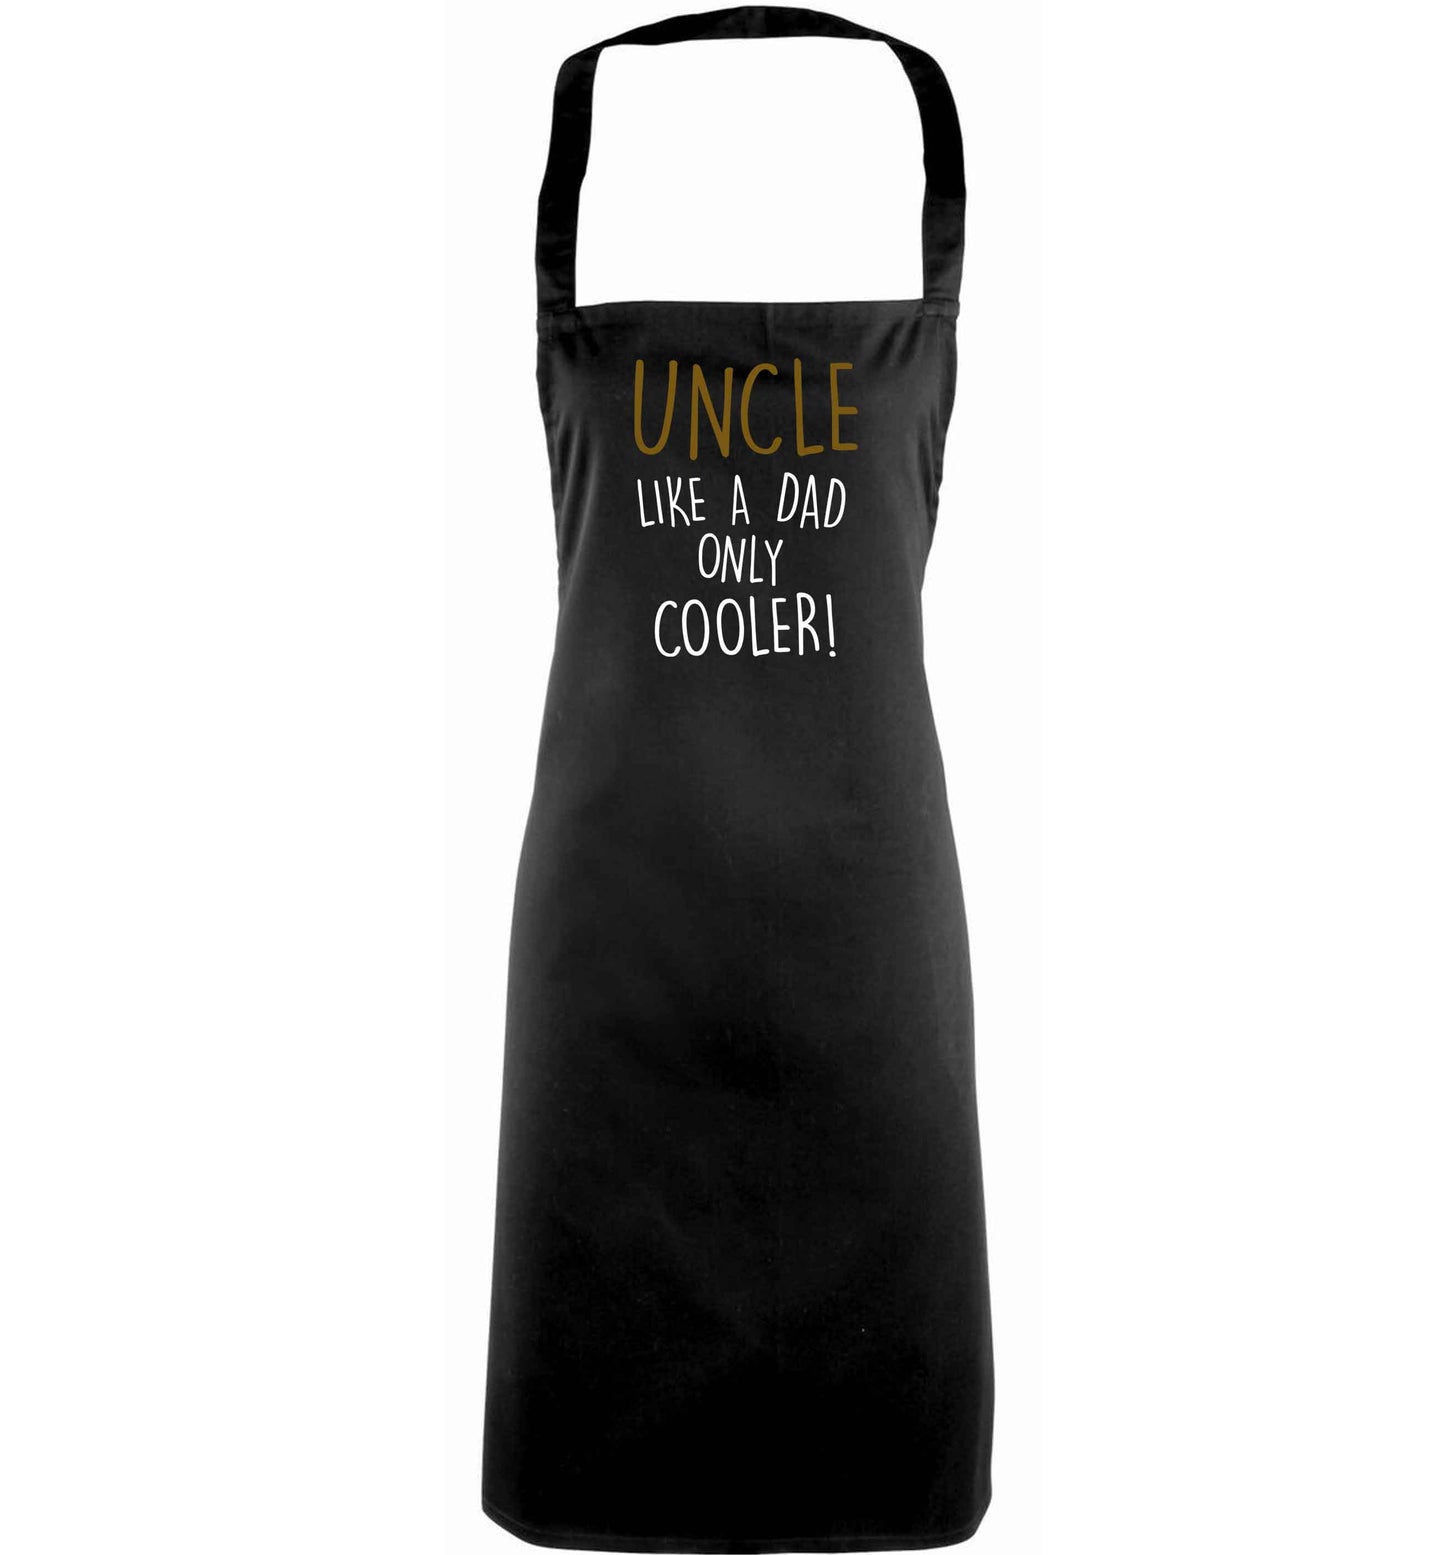 Uncle like a dad only cooler adults black apron